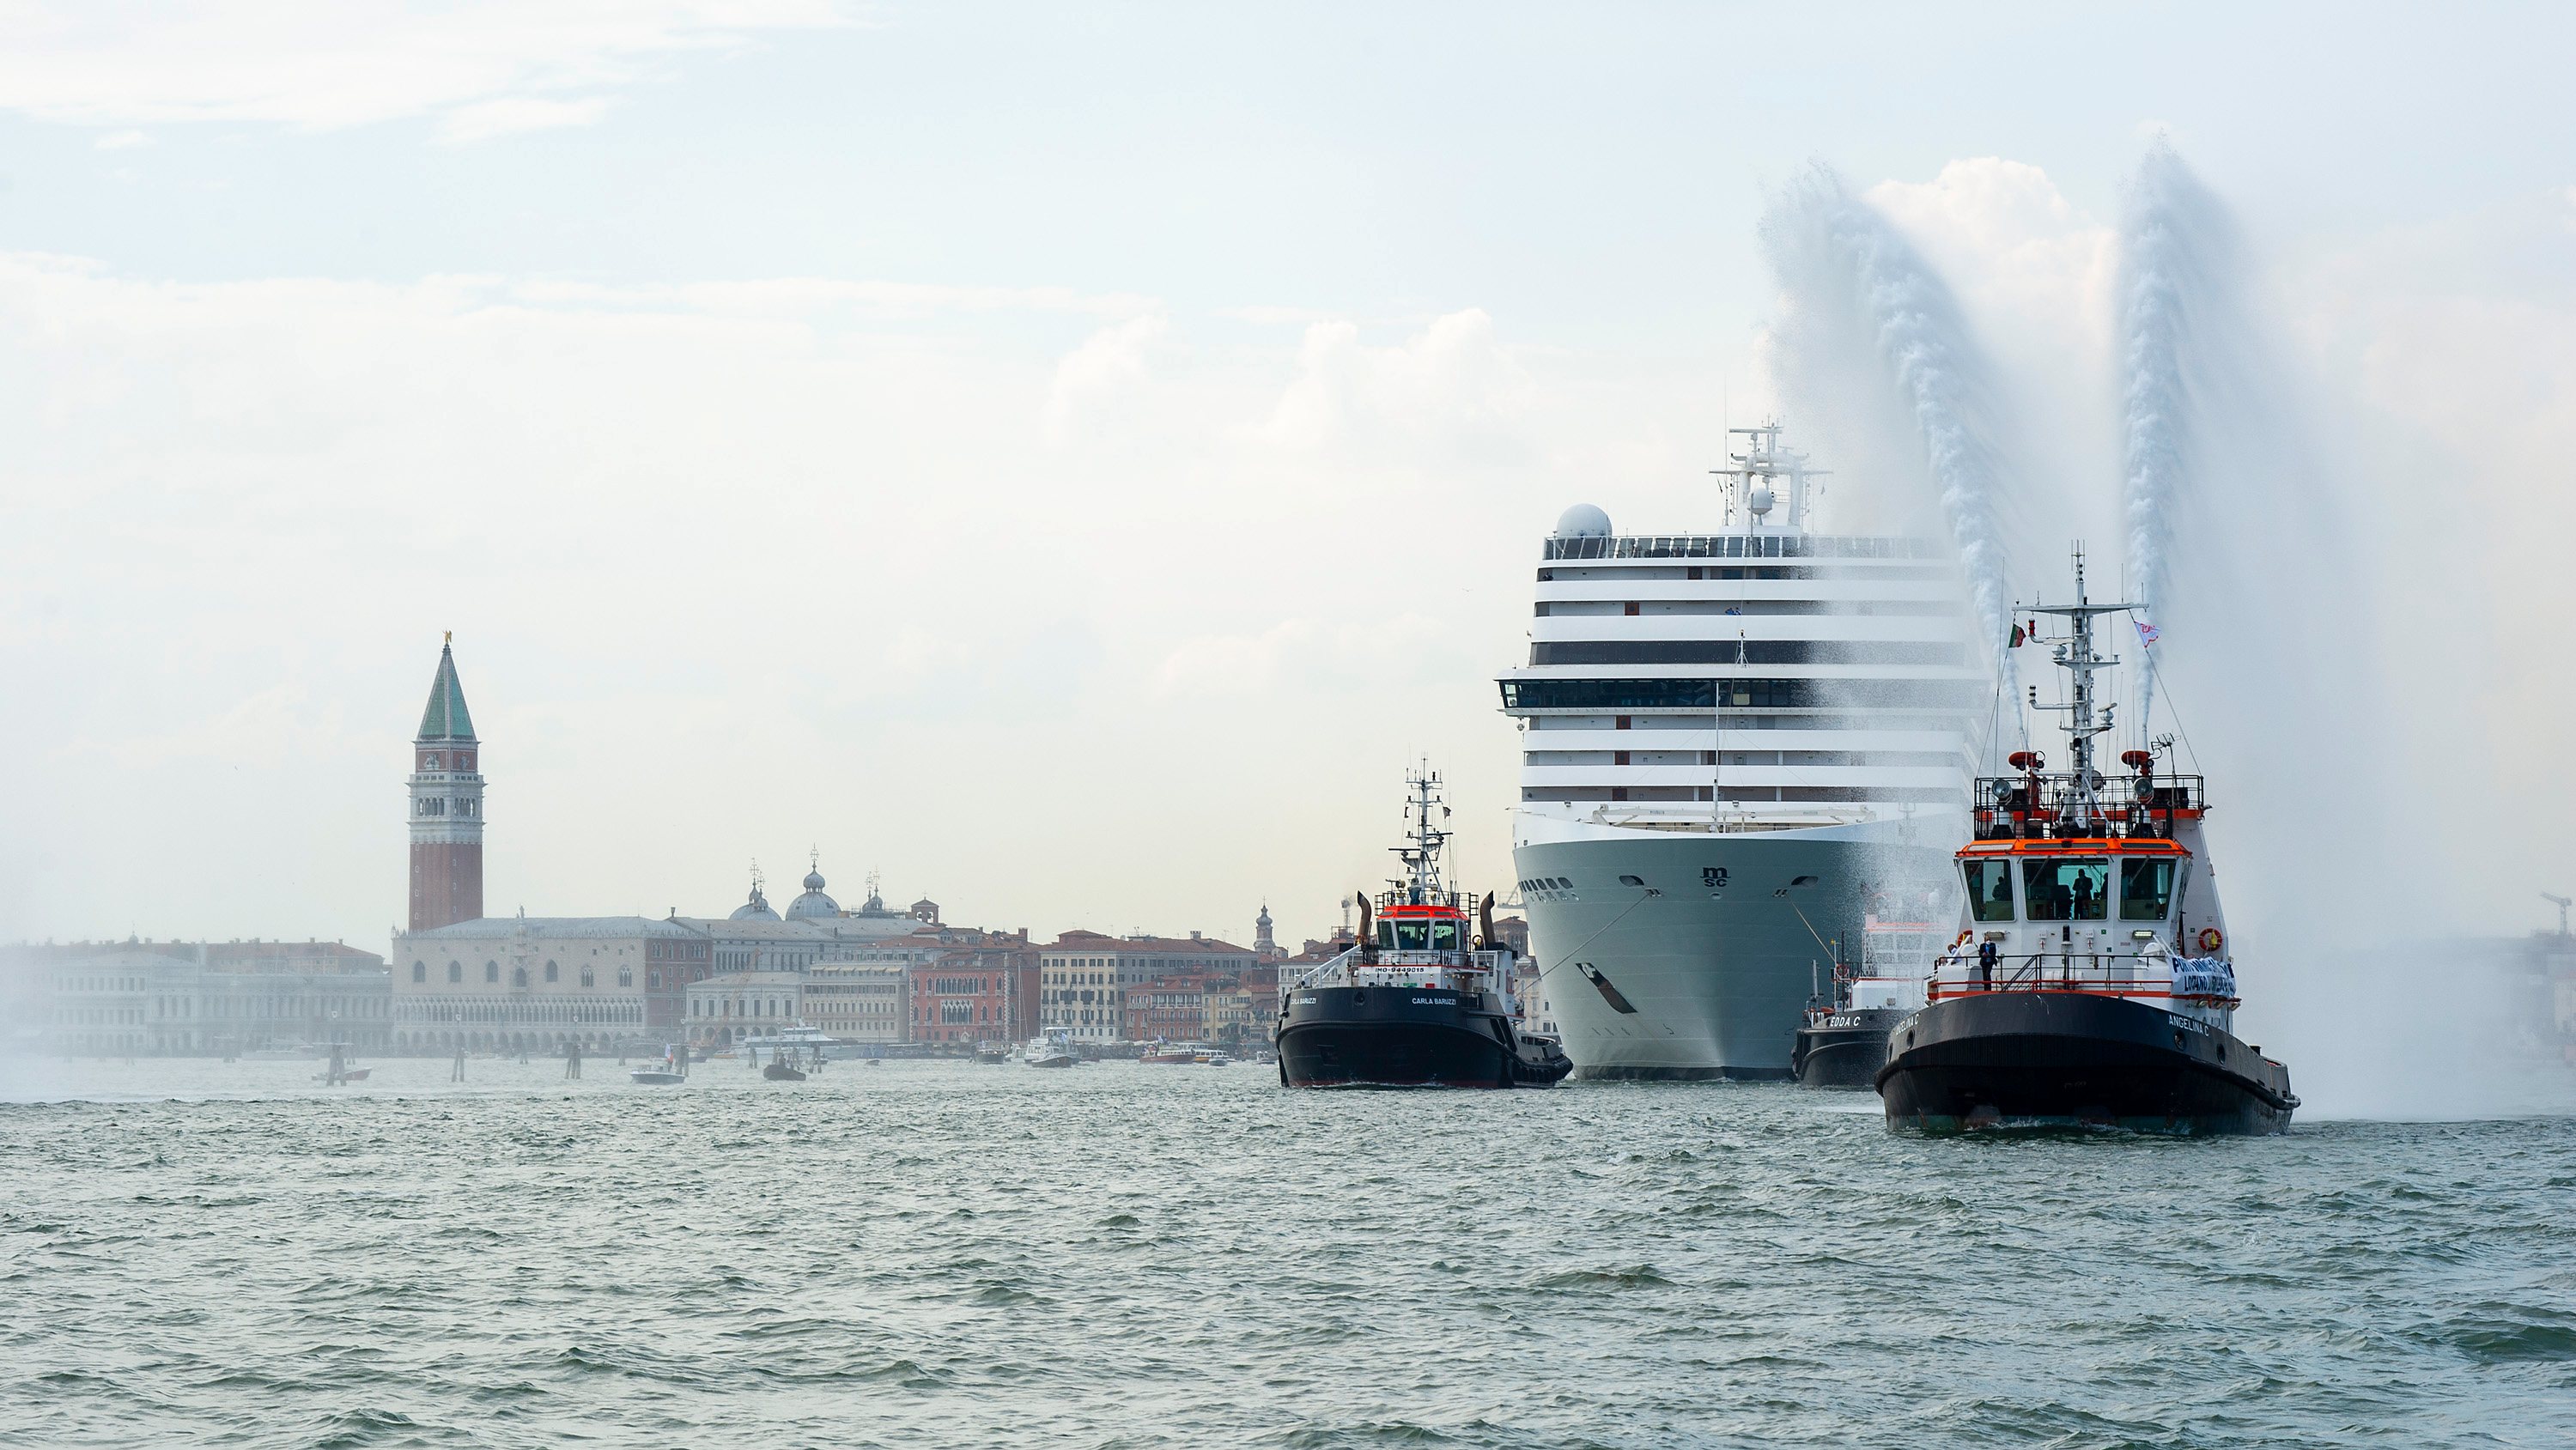 Venice Port Workers React To Passage Of First Cruise Ship